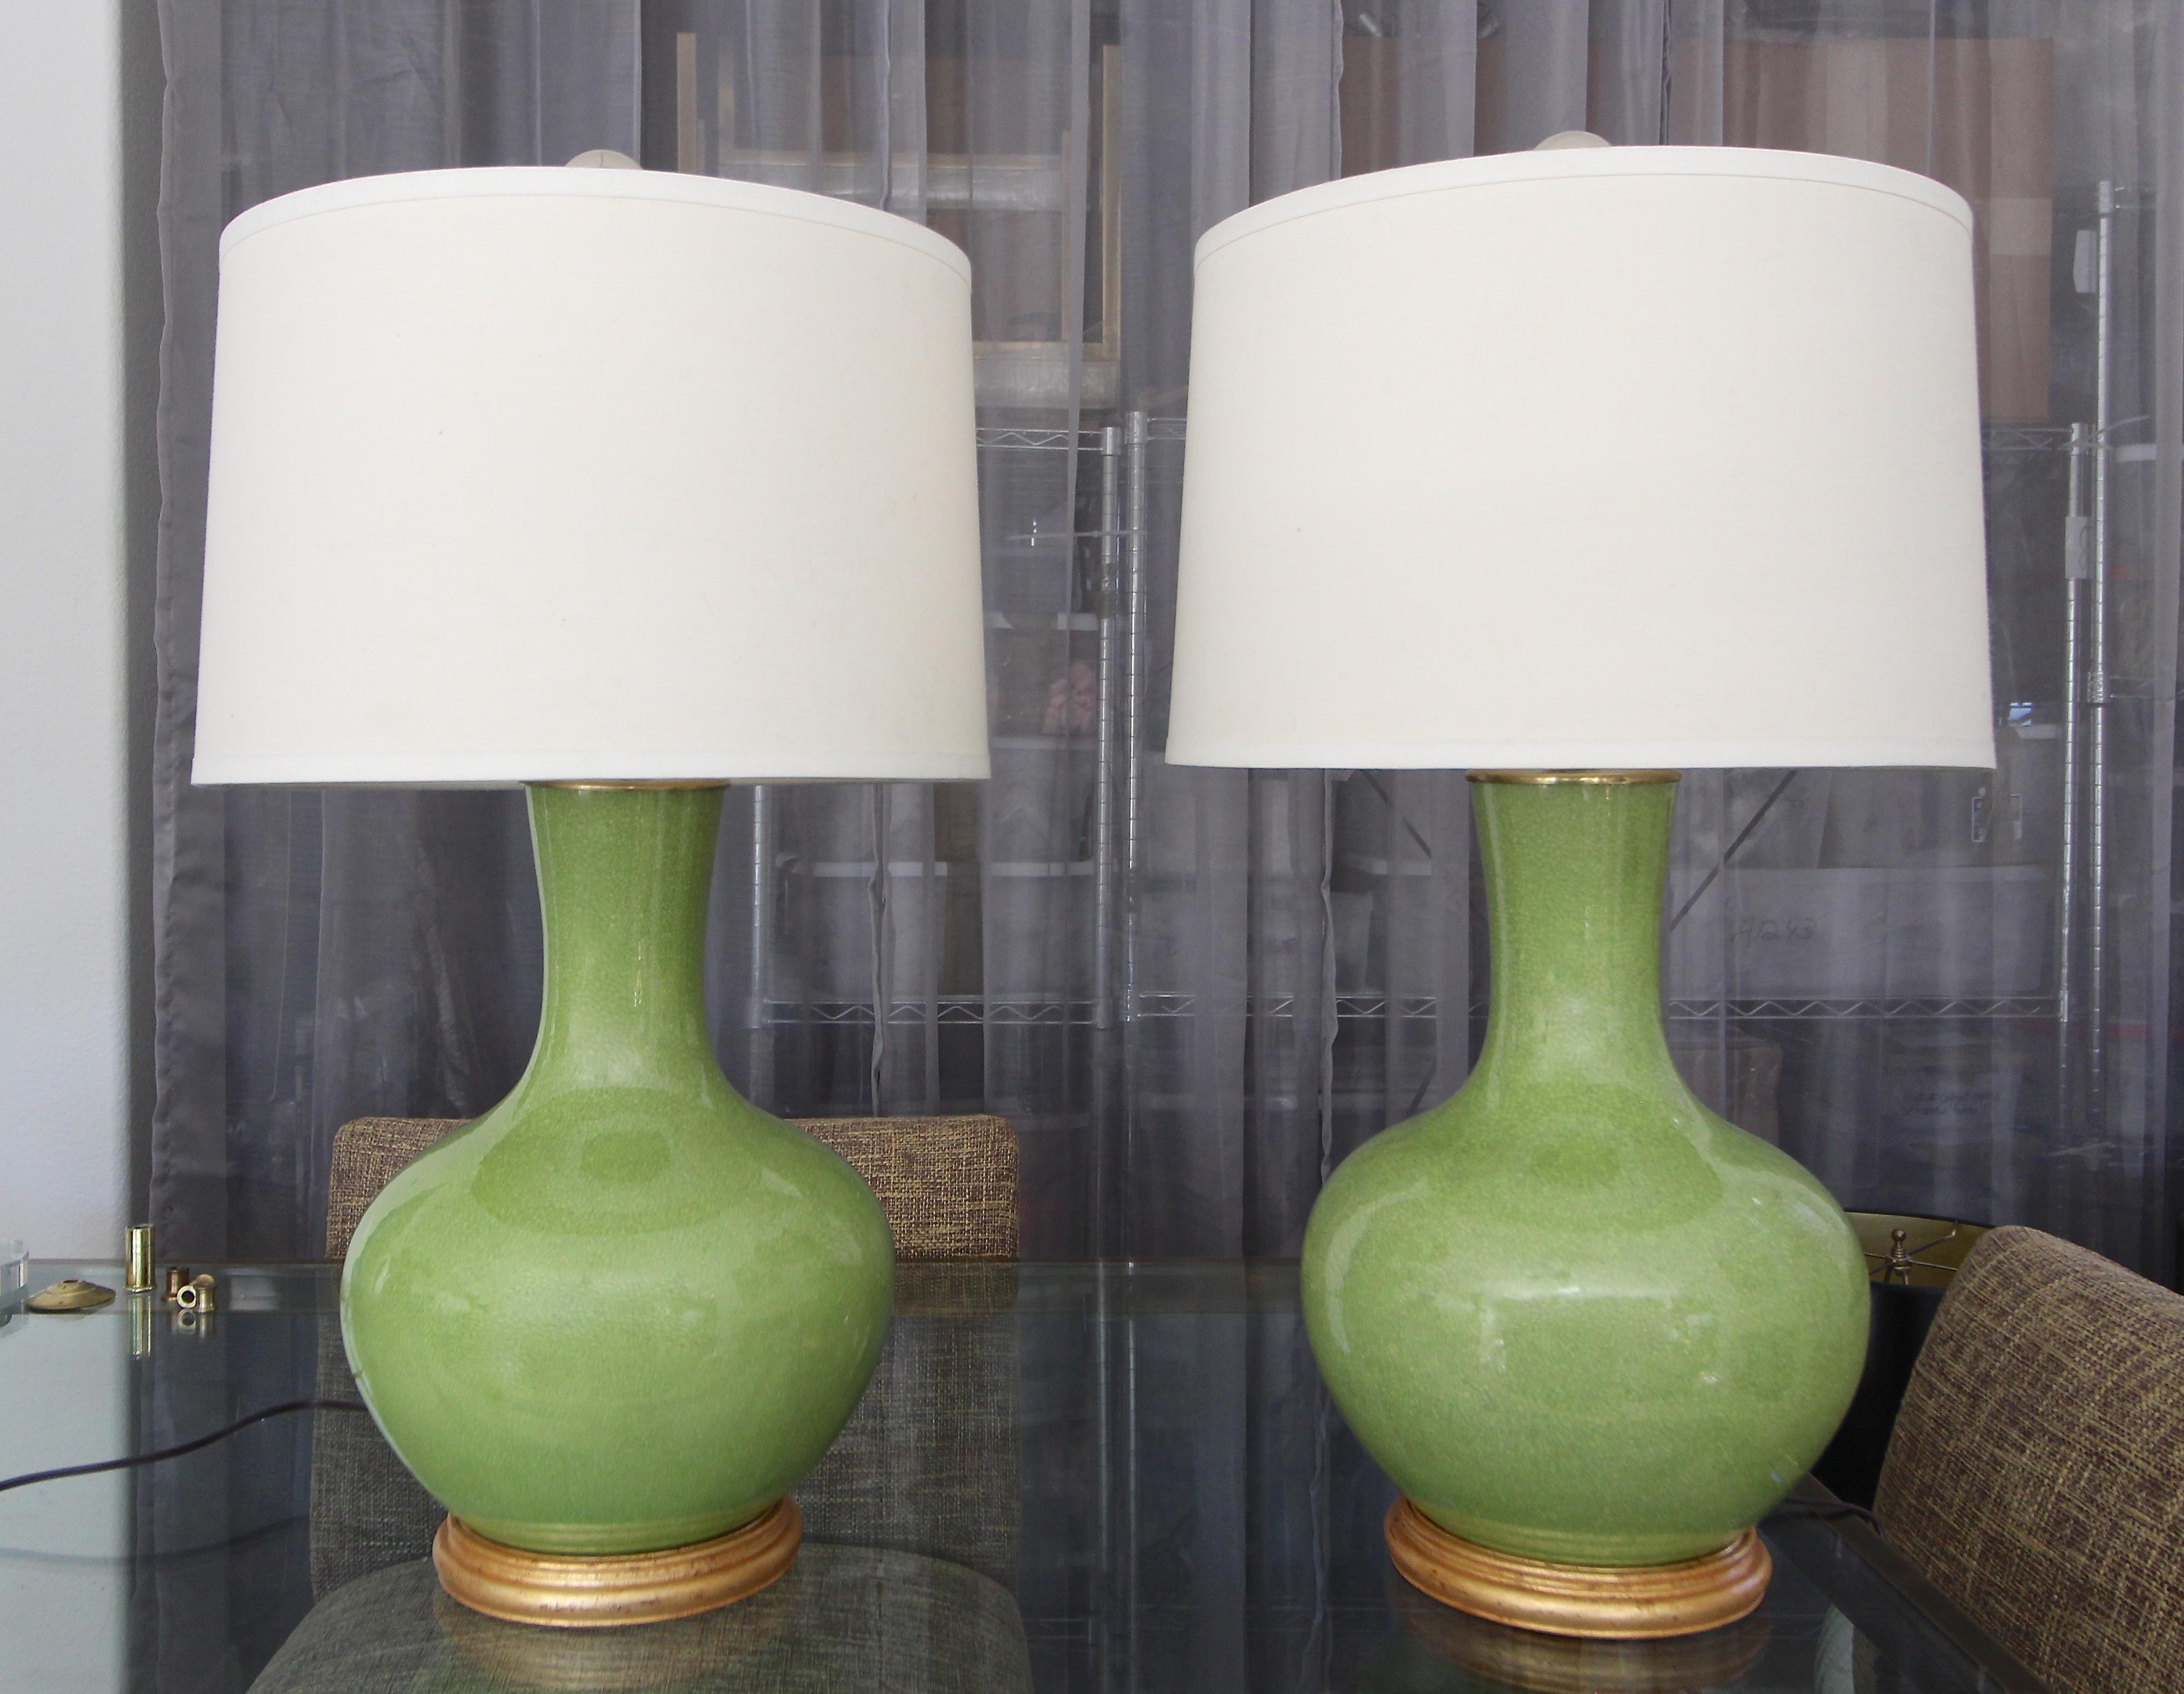 Pair of Chinese apple green porcelain wide baluster form vases mounted on gilt turned wood lamp bases. Newly wired with new 3 way brass sockets and cords. Vase portion with base 17.5